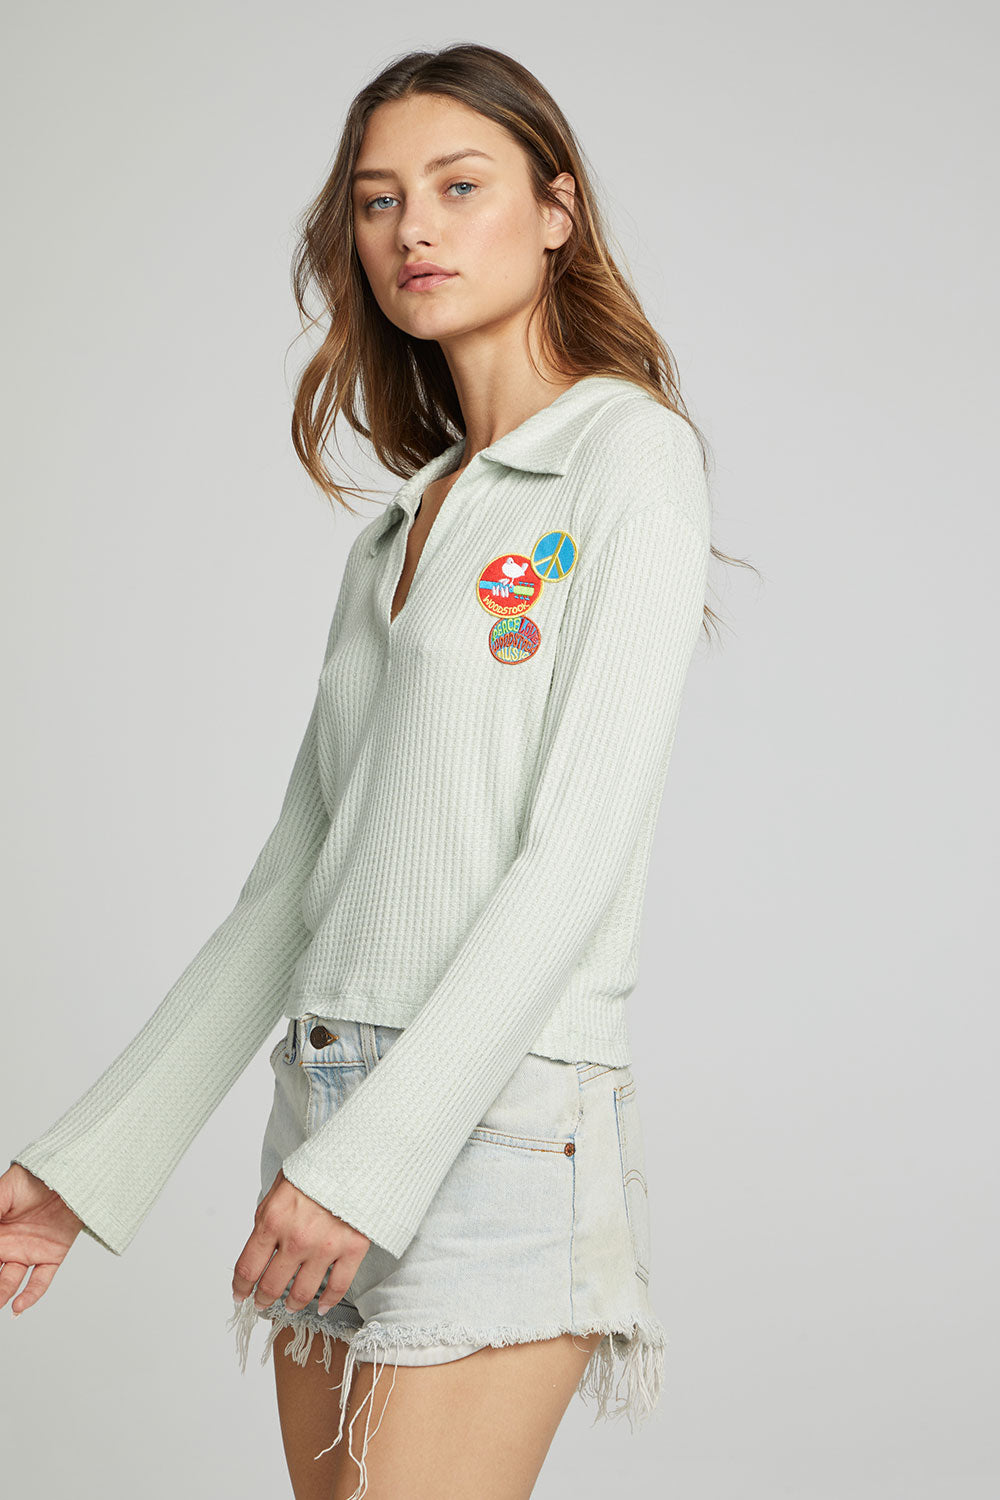 Woodstock - Patches WOMENS chaserbrand